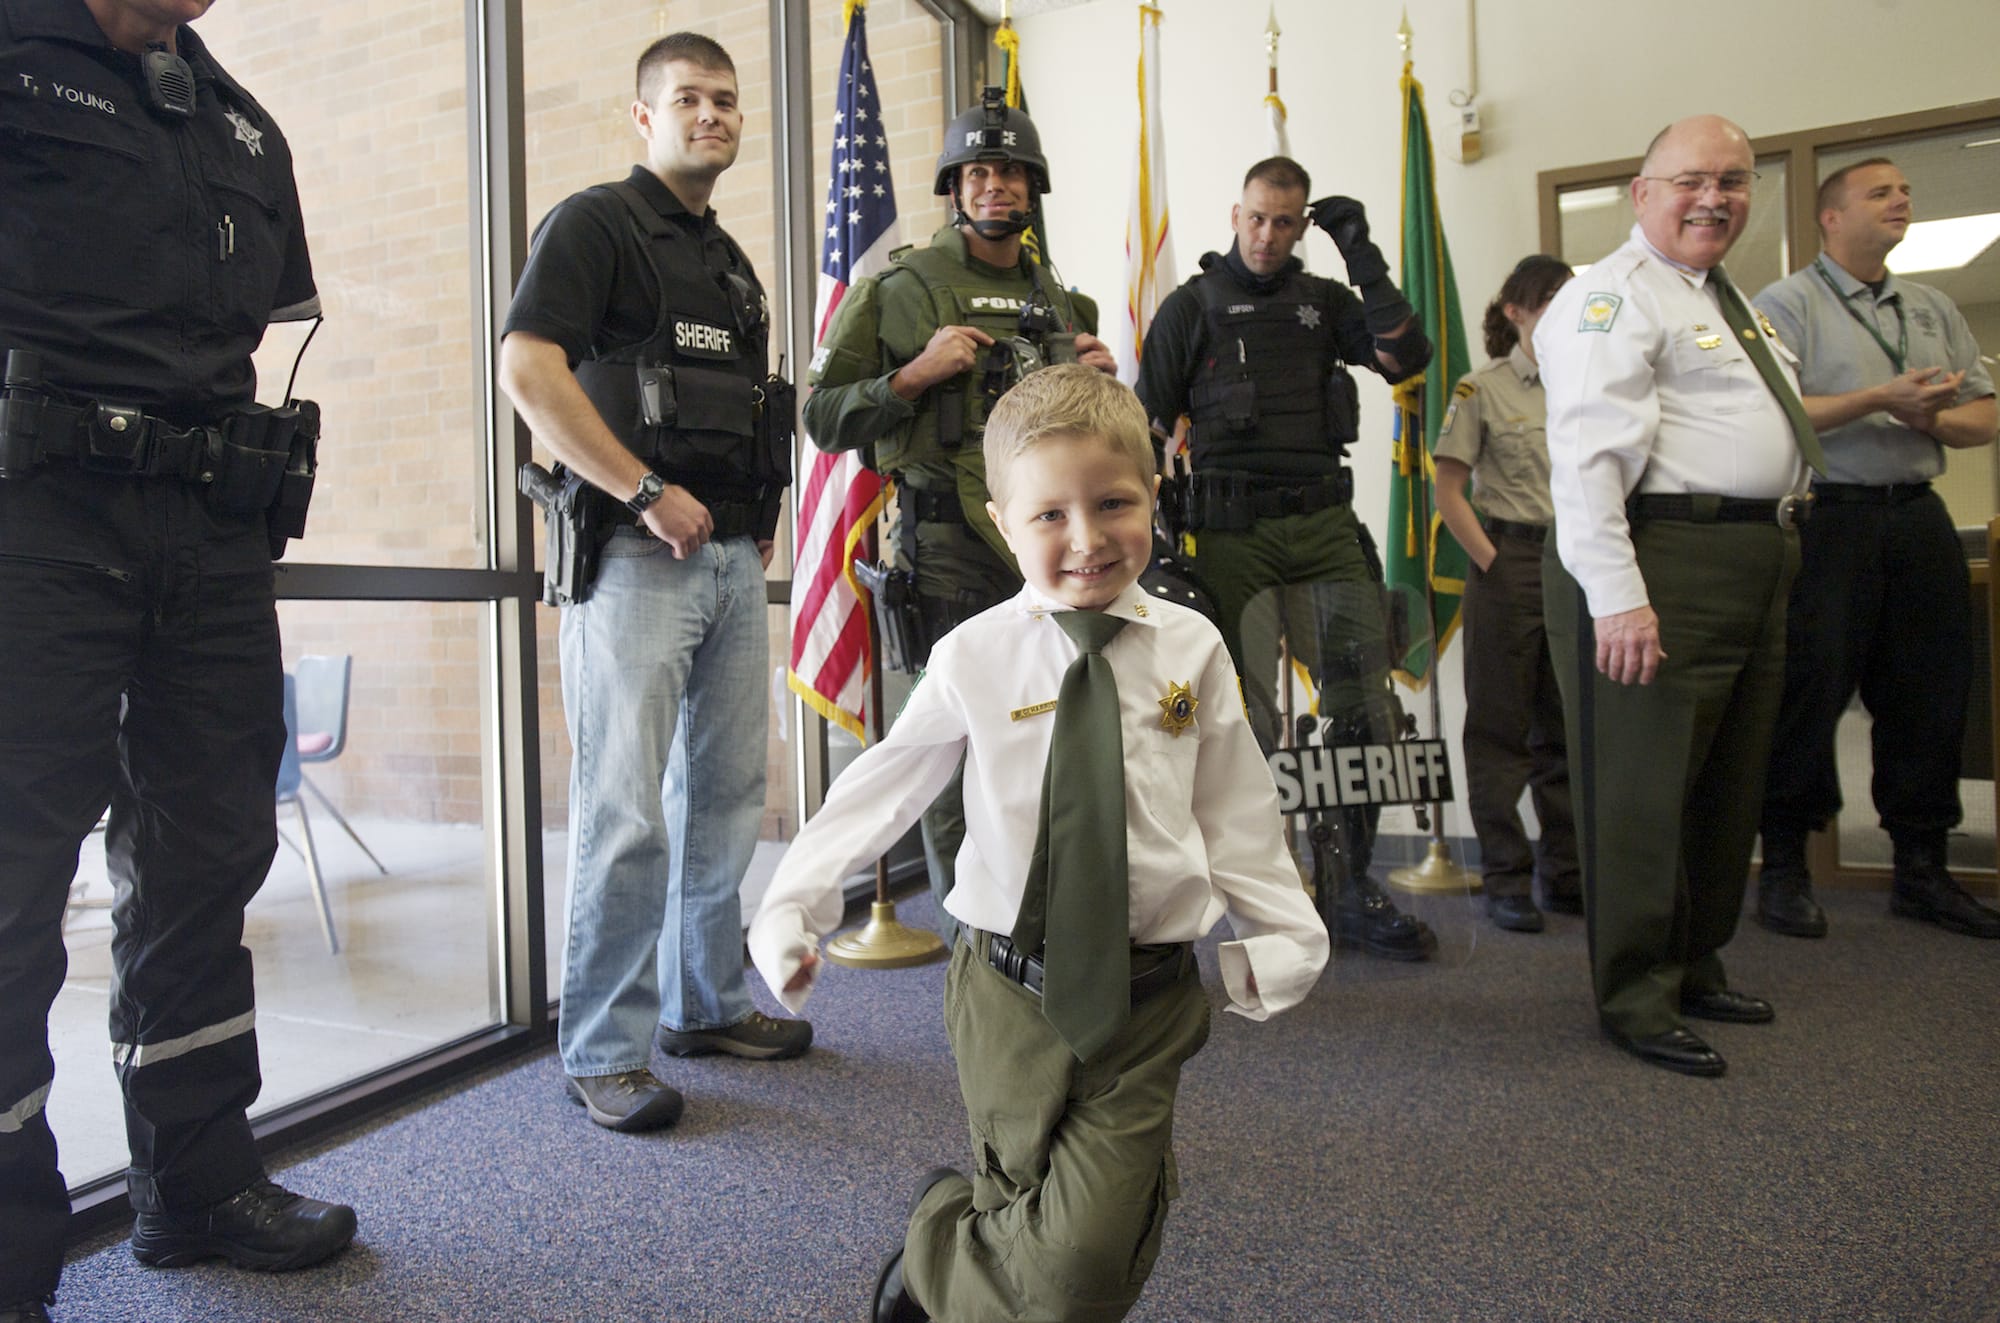 Carter Harris, 4, was named Chief for a Day on May 16 by the Clark County Sheriff's Office.